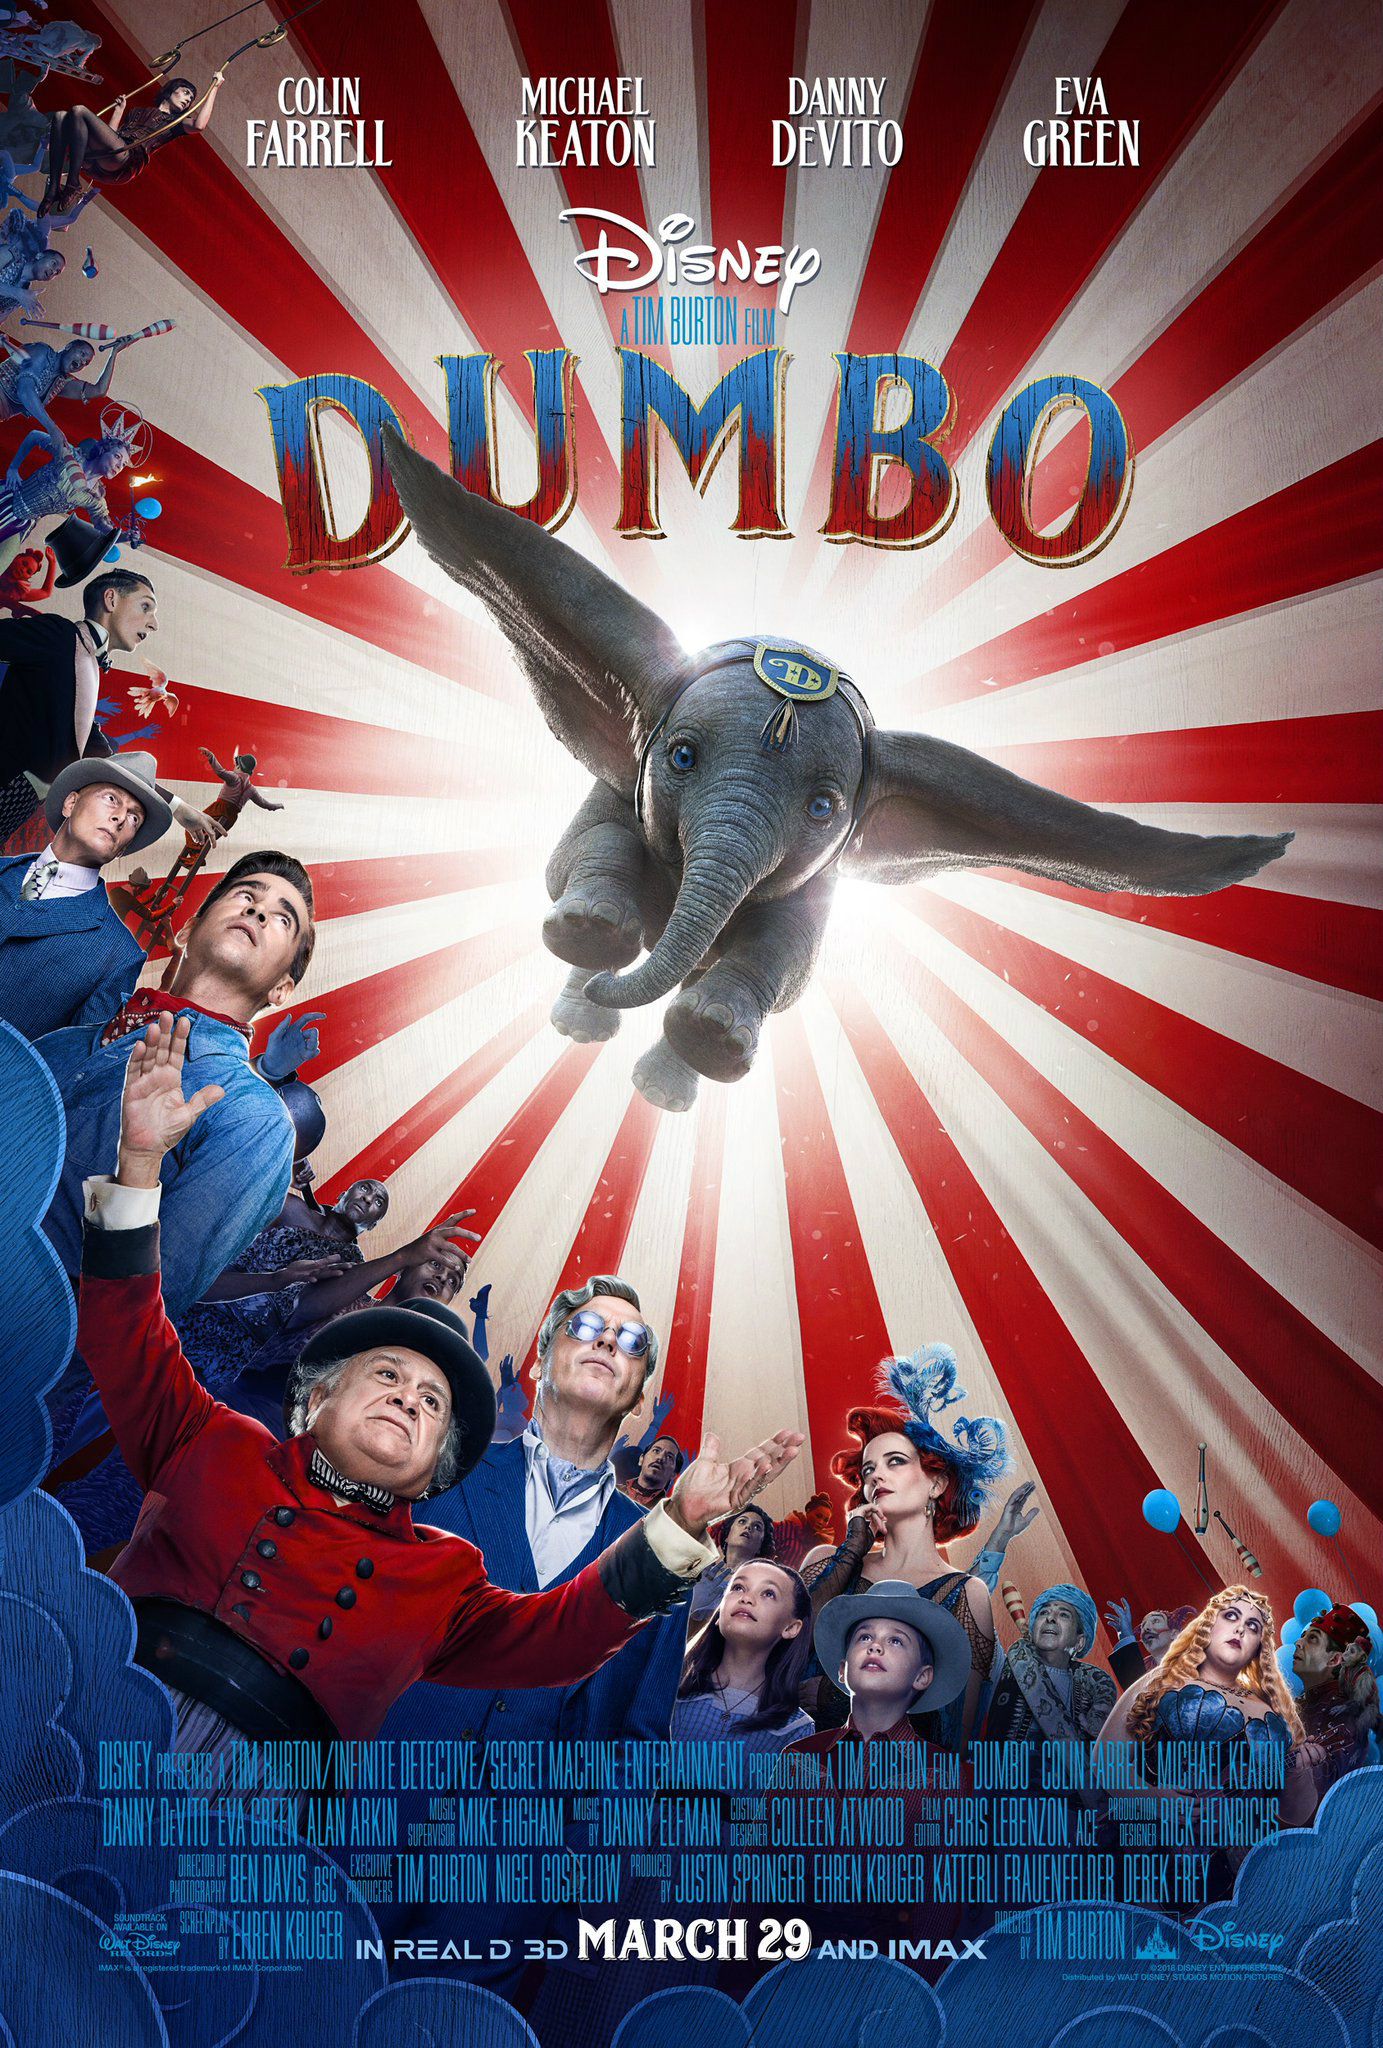 Dumbo Early Reactions: An Enjoyably Whimsical (If Thin) Disney Remake